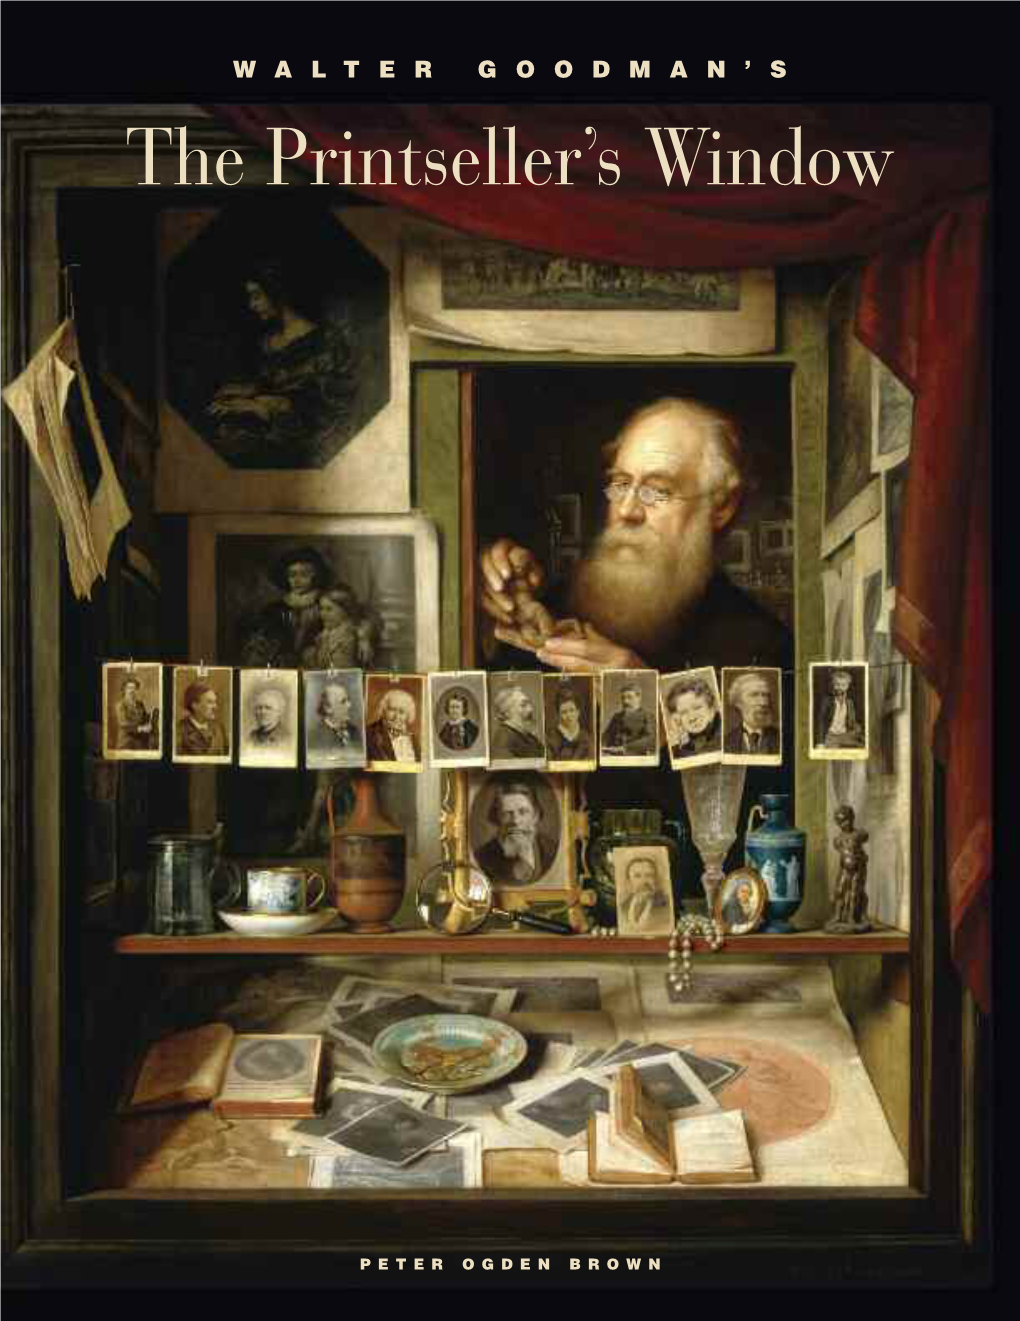 The Printseller's Window: Solving a Painter's Puzzle, on View at the Memorial Art Gallery of the University of Rochester from August 14–November 8, 2009